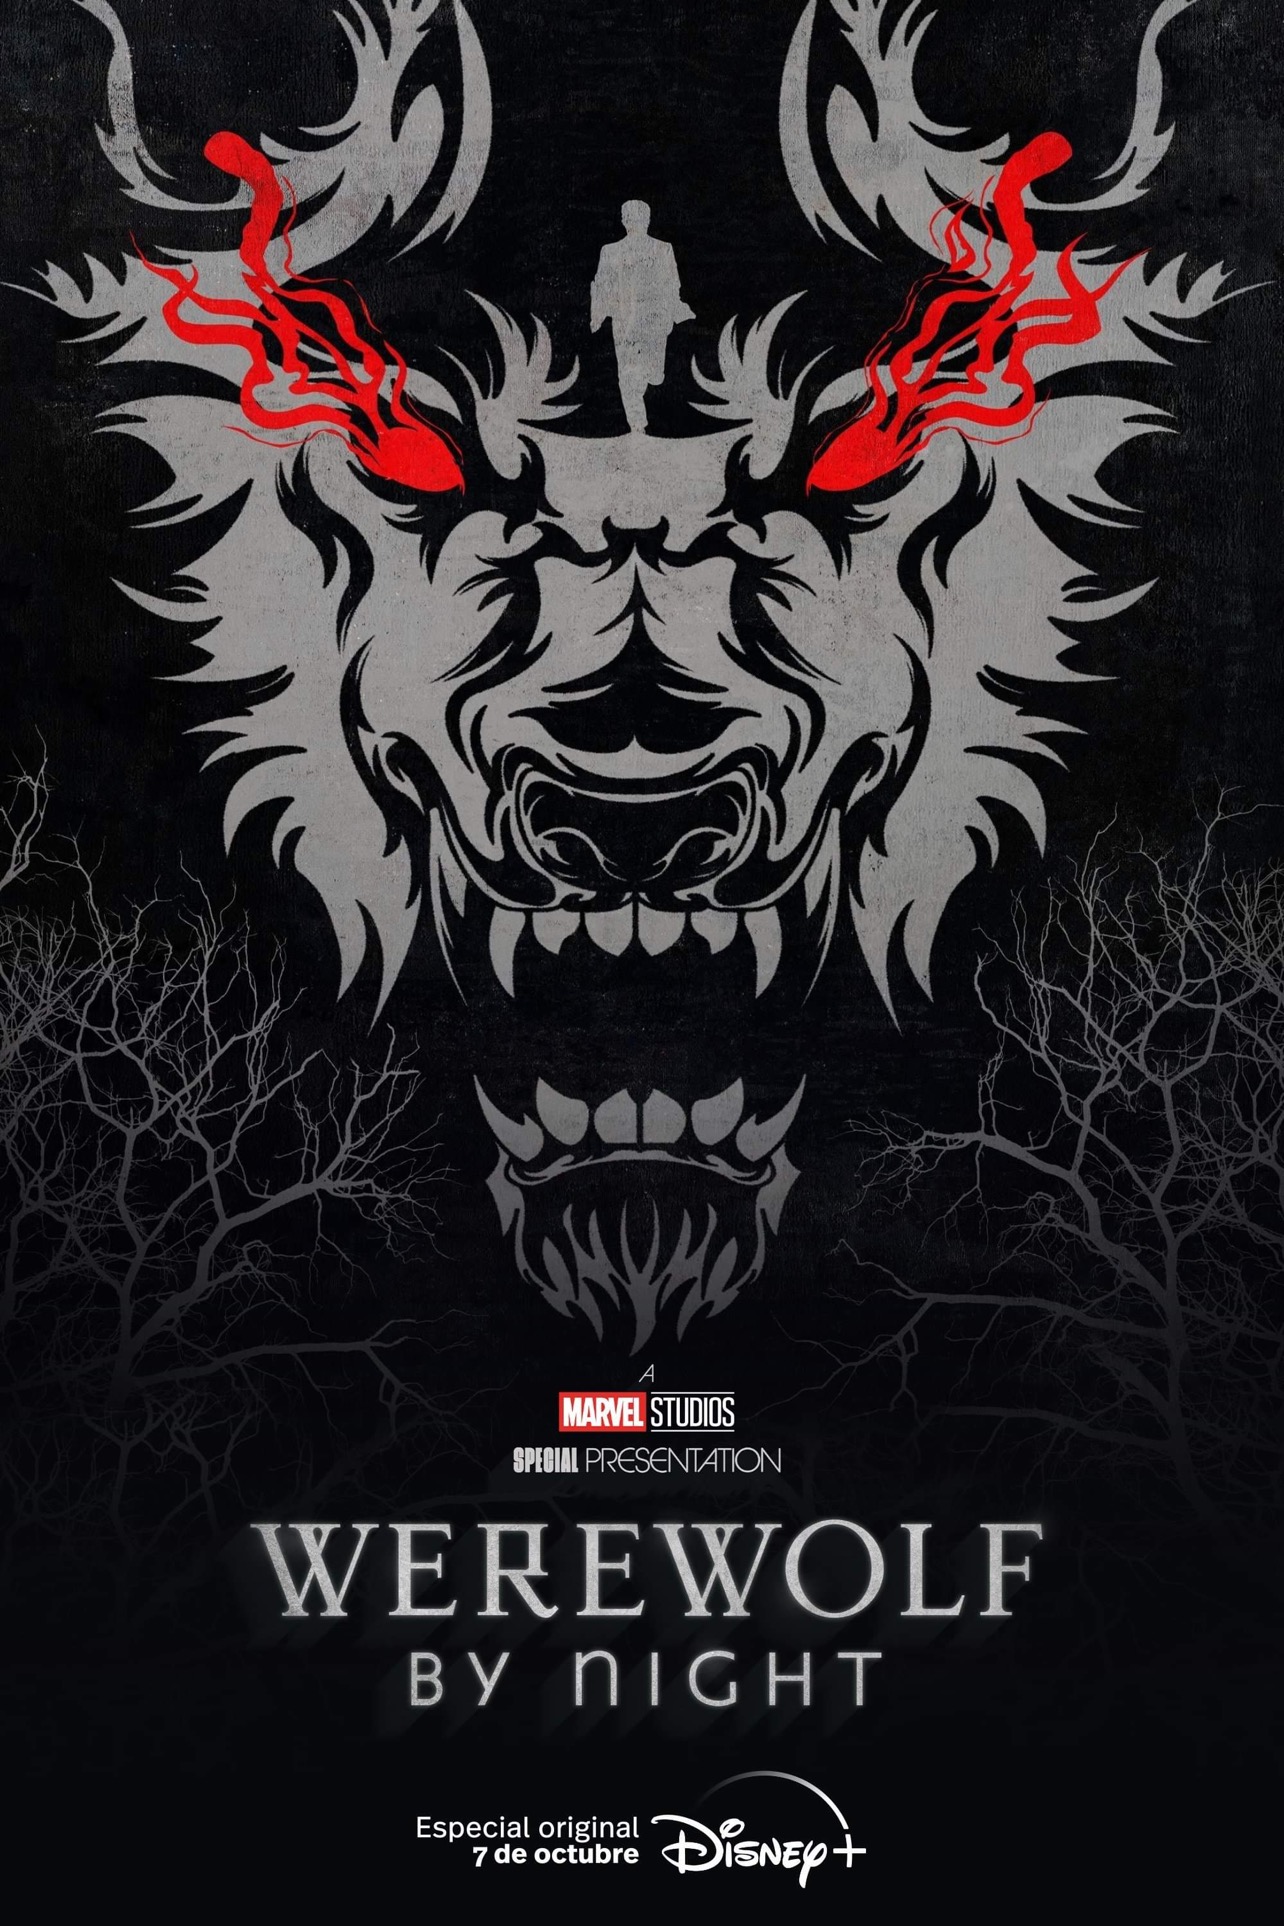 Disney and Marvel Accused of Plagiarizing Art for “Werewolf By Night” Poster  - Disneyland News Today